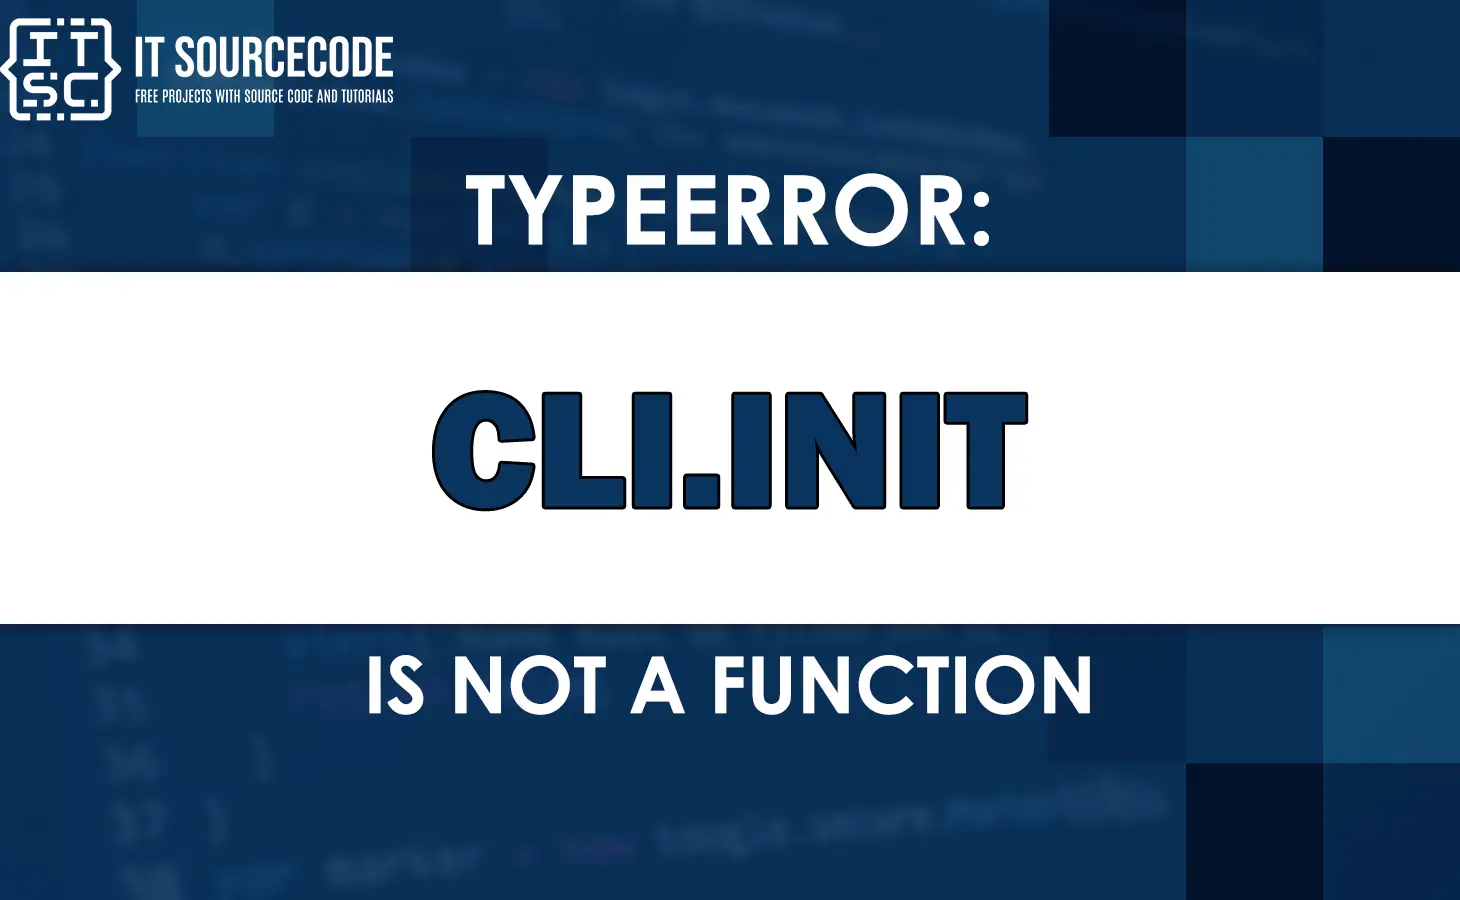 Typeerror cli.init is not a function